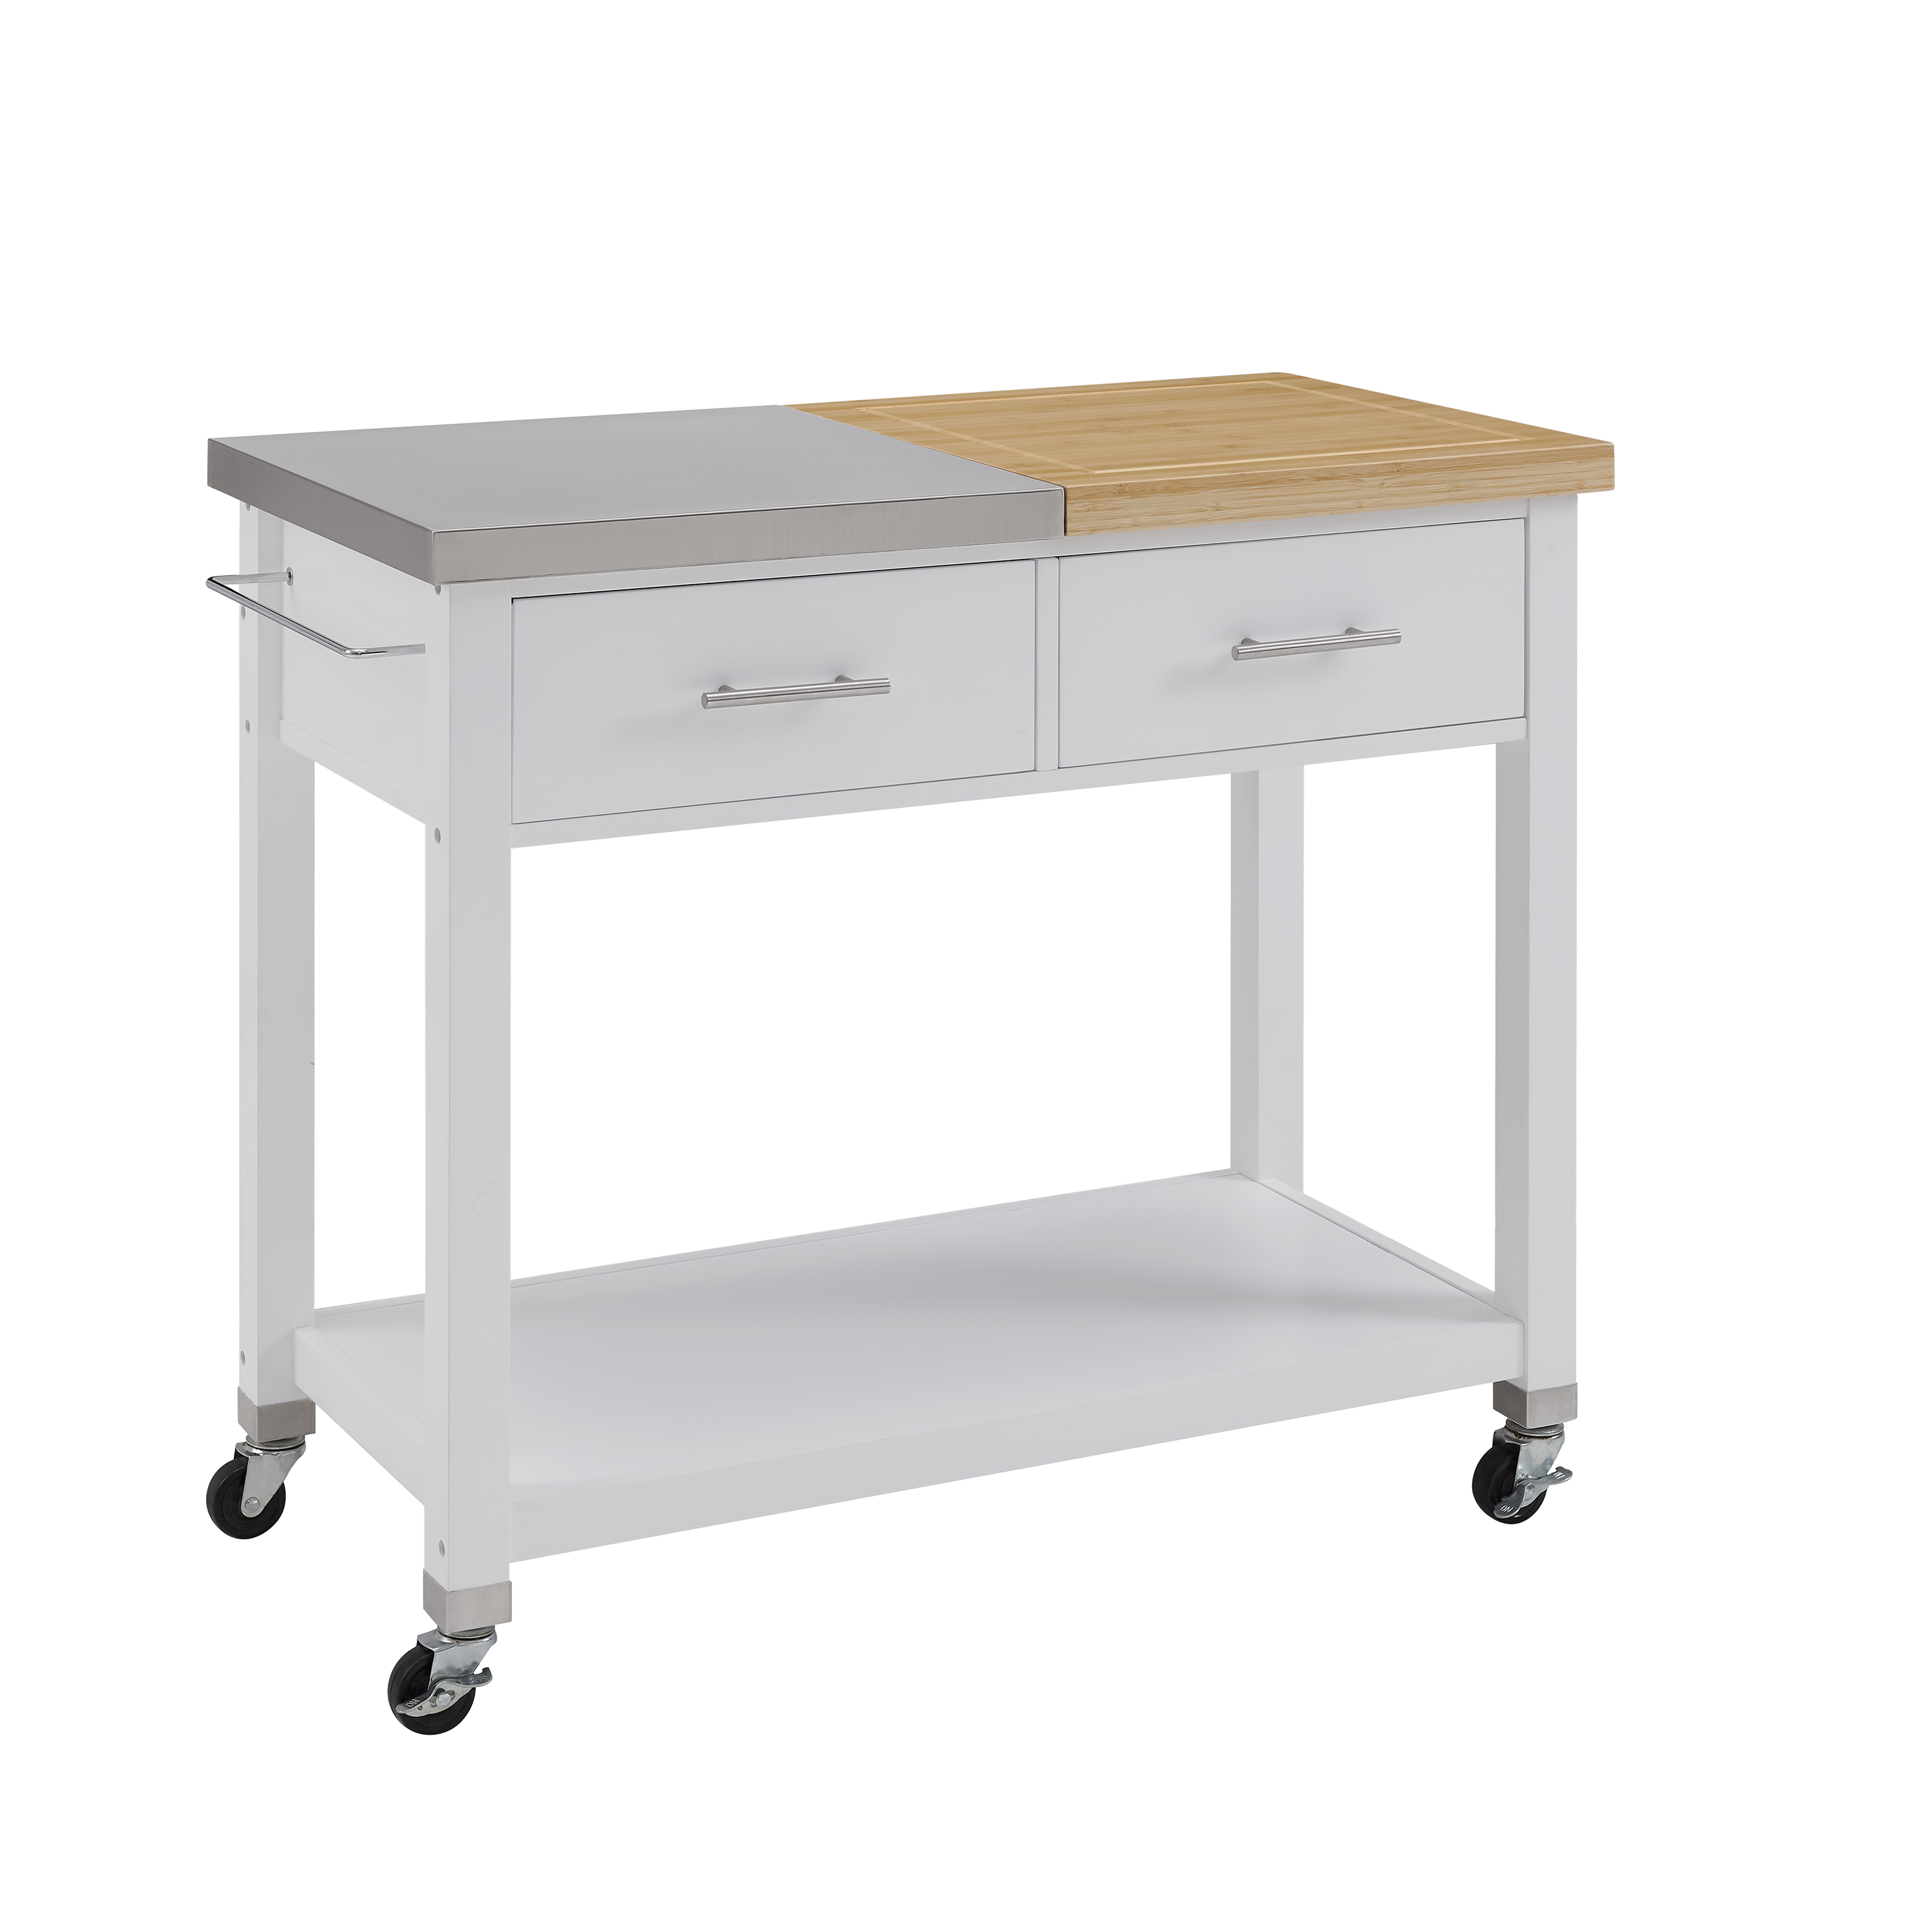 Better Homes & Gardens Maxwell Kitchen Cart, White/Brown - image 1 of 11